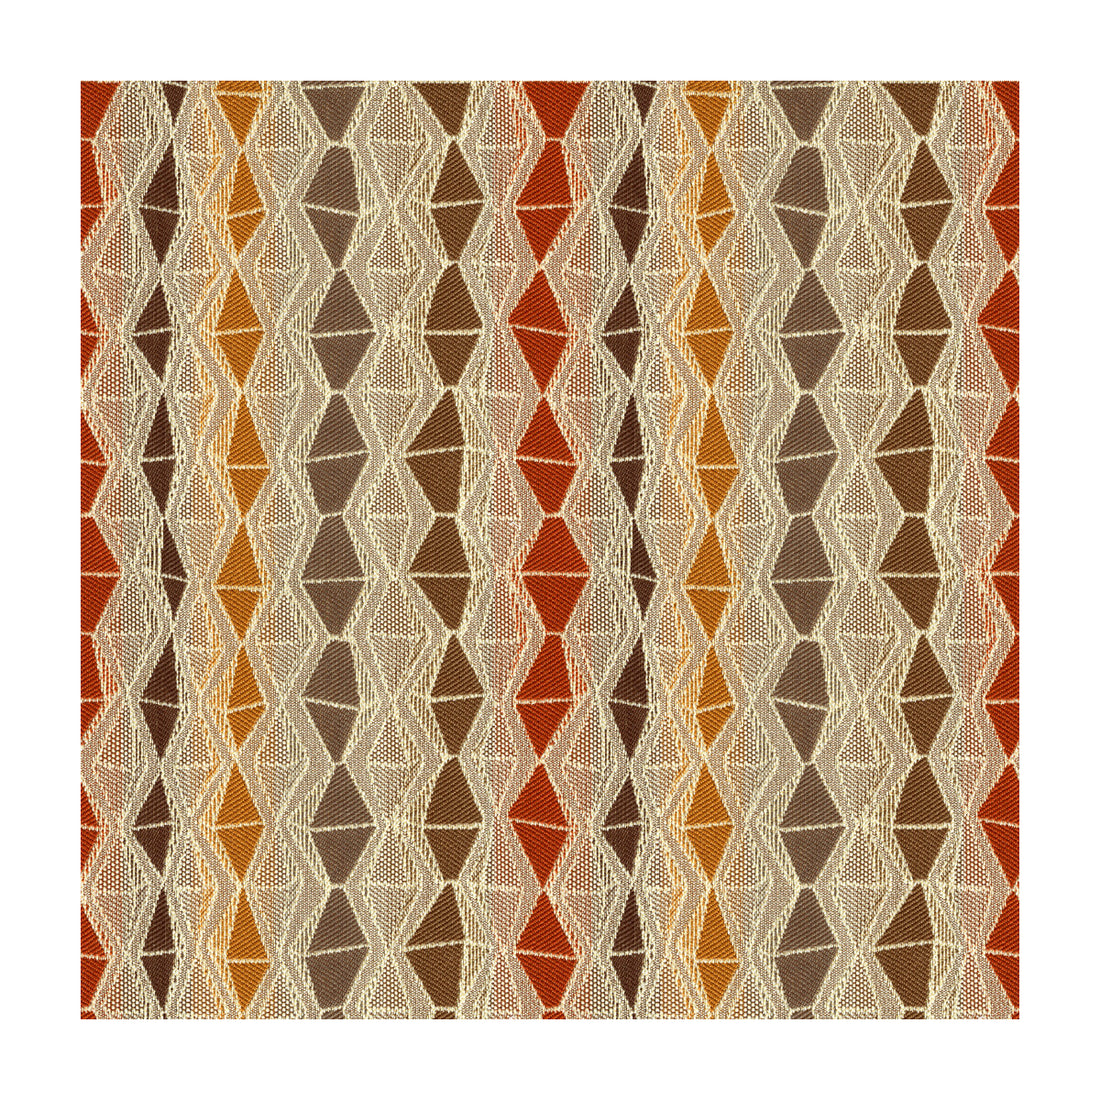 Nyota fabric in antelope color - pattern 33868.1624.0 - by Kravet Contract in the Tanzania J Banks collection